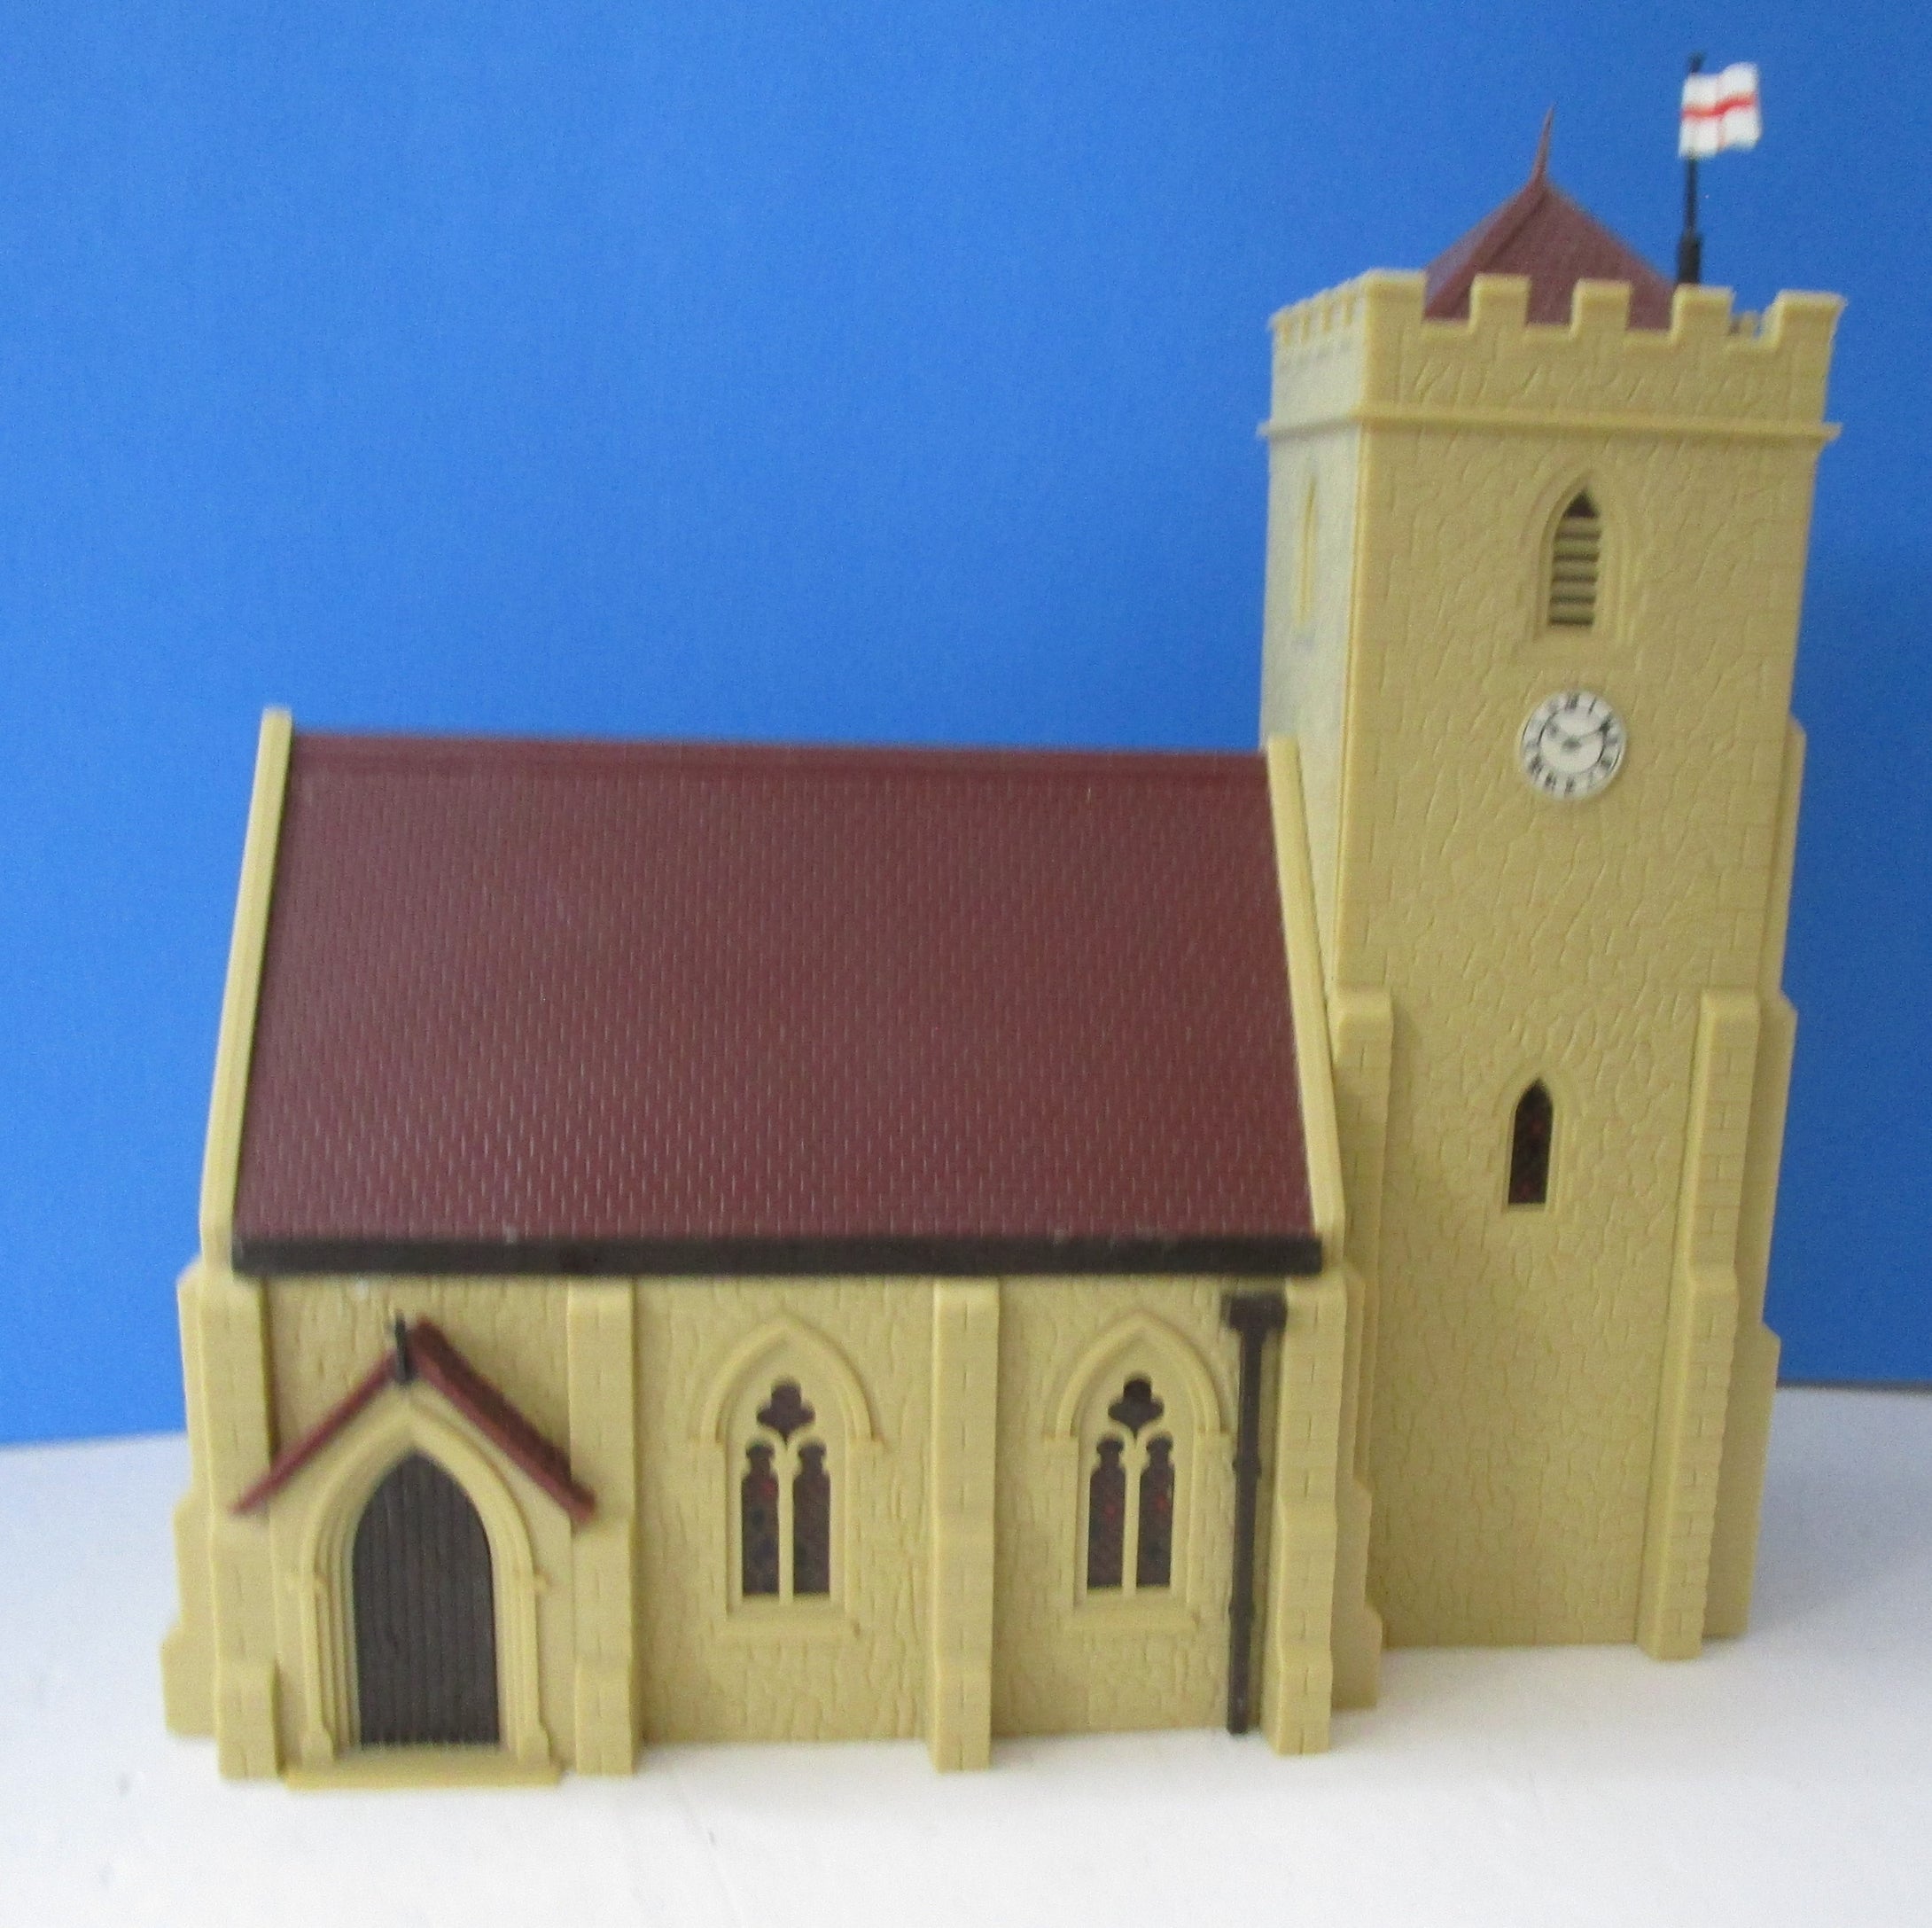 R599U Country church with stained glass windows built from a Hornby kit - used